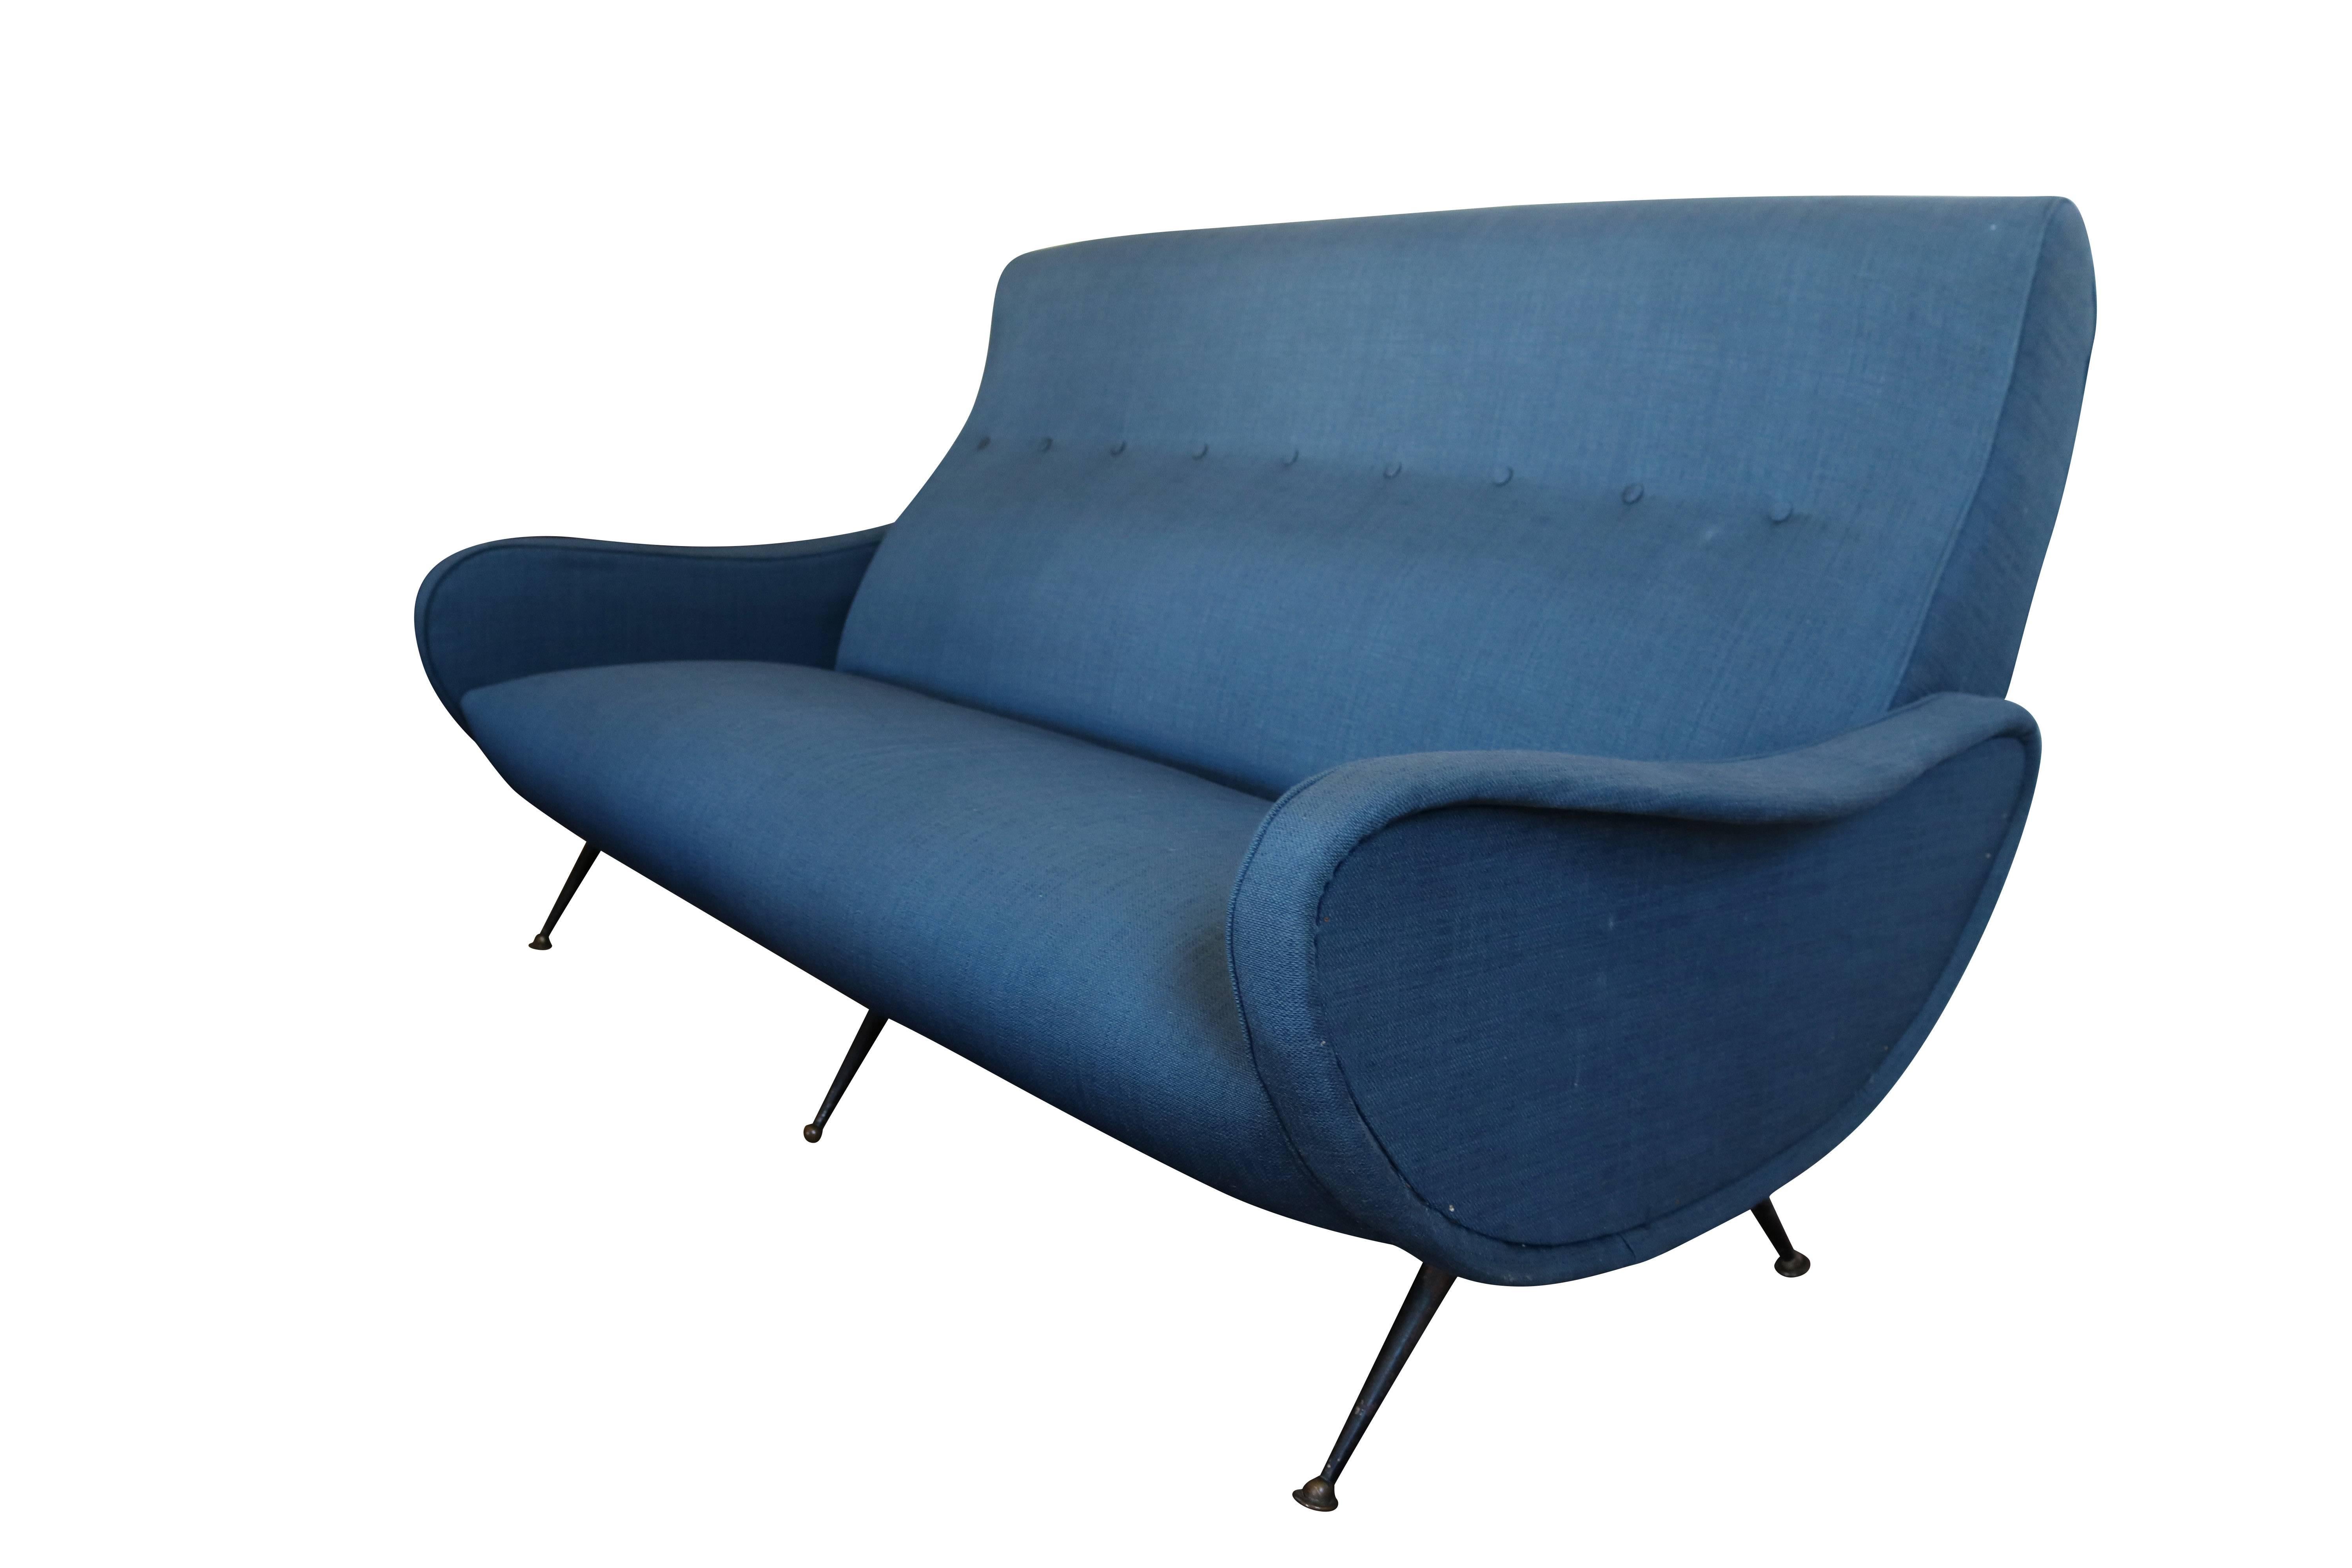 An icon of modern design, Marco Zanuso is probably best known for this sofa design with its distinctive arms. Sofa is sturdy and intact. Upholstery may be original-it does show light wear and some upholstery staples are visible (see arm detail